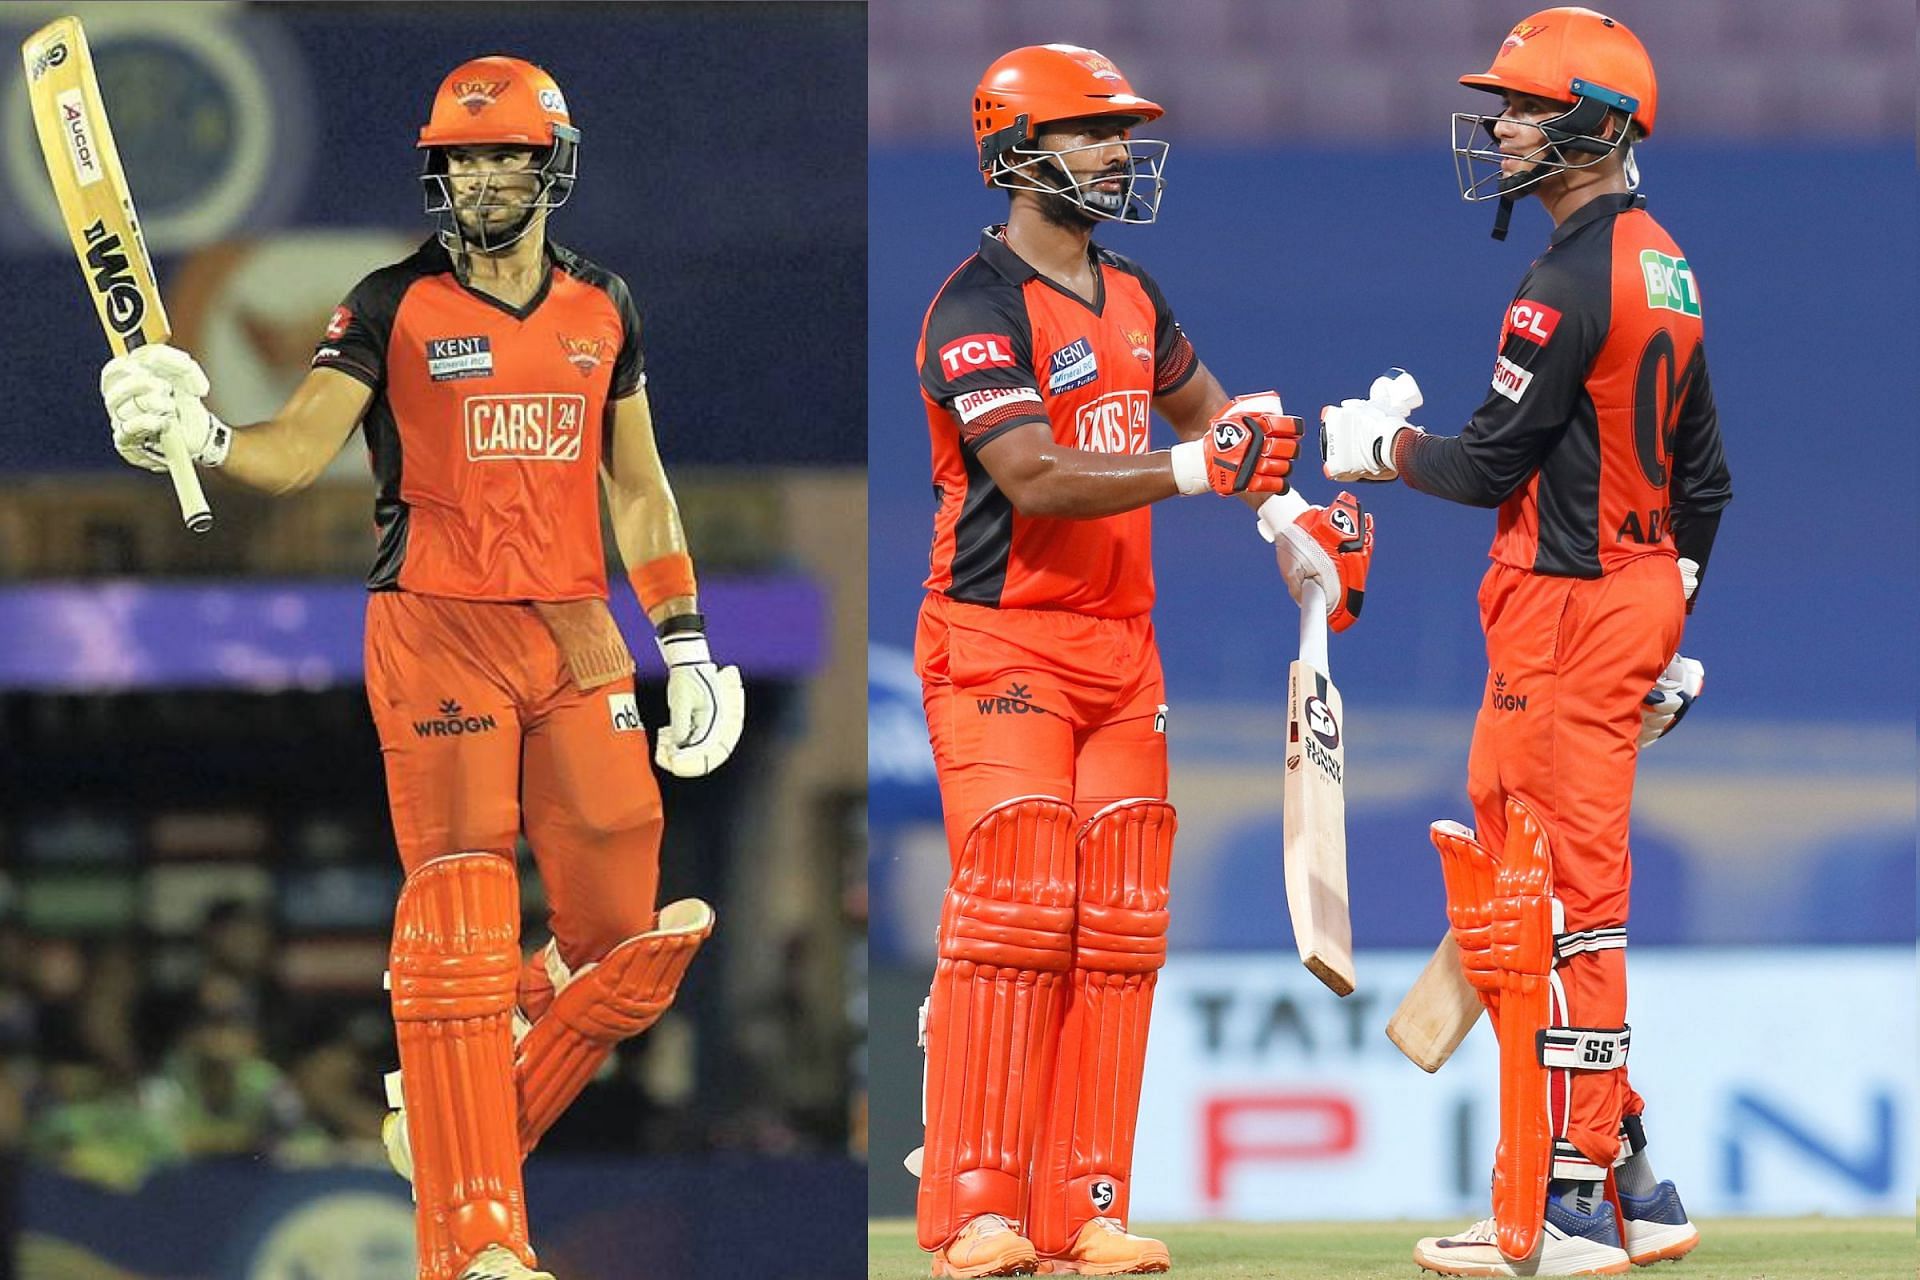 Sunrisers Hyderabad could manage only six wins in IPL 2022.